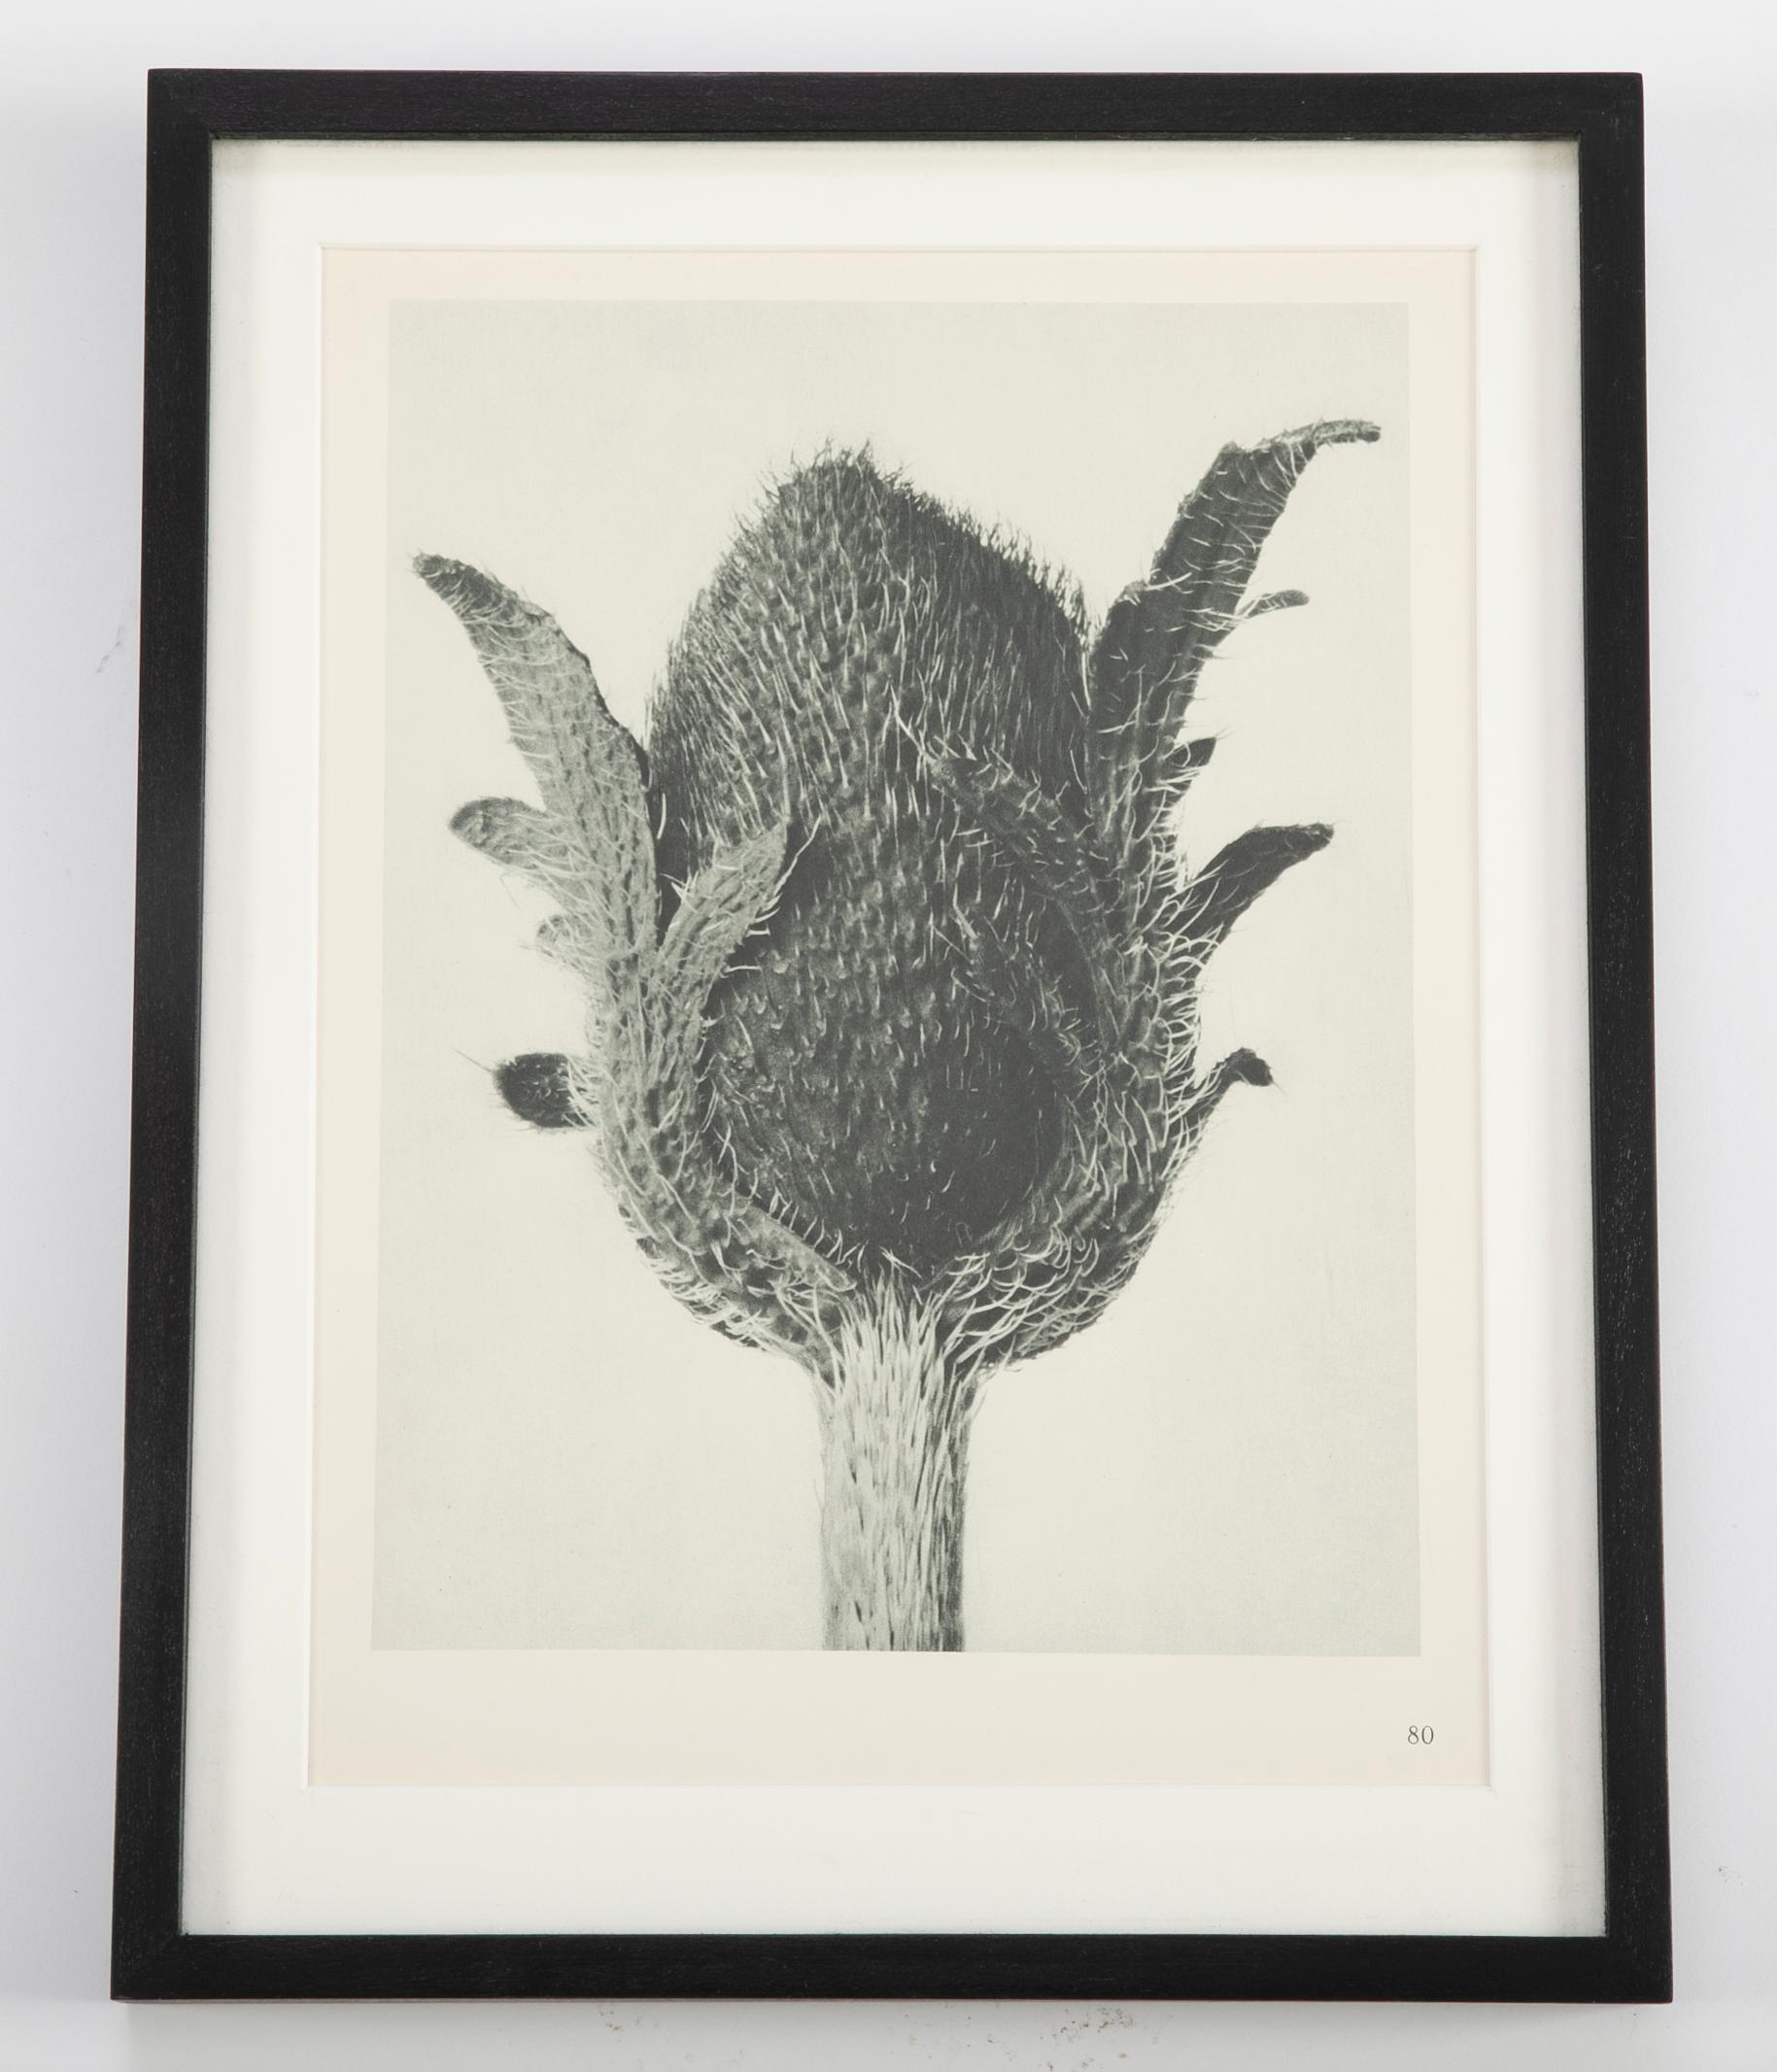 Twelve botanical photogravures by Karl Blossfeldt (German, b. 1914 - d. 1932), first edition 1928, Berlin. Blossfeldt was a well-known artist, teacher, sculptor and photographer; best known for his close up photographs of plant life. Hung together,